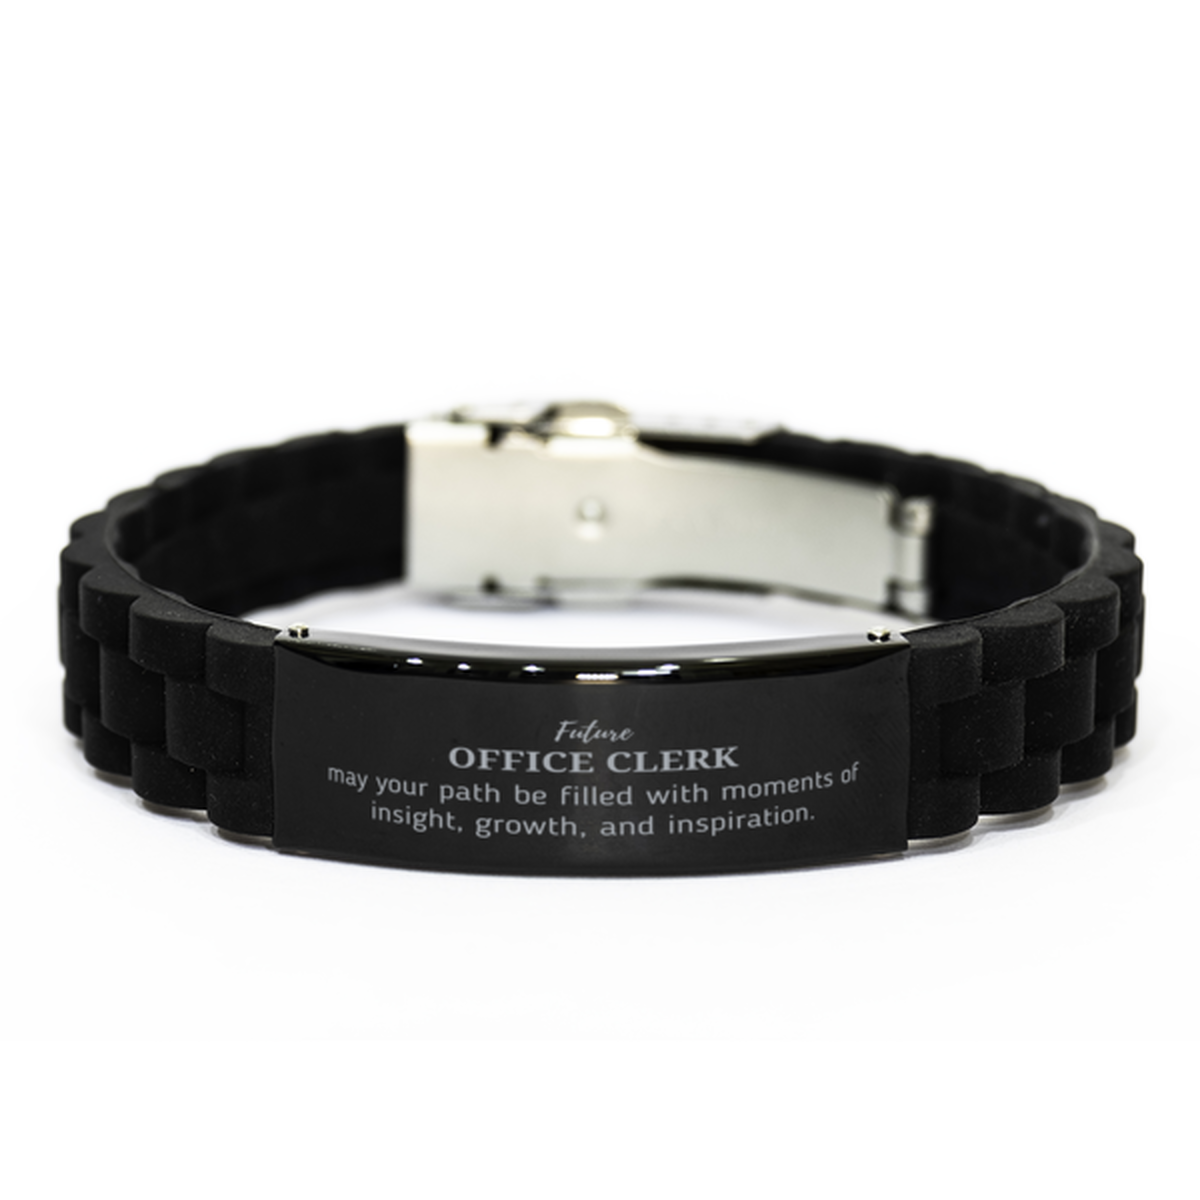 Future Office Clerk Gifts, May your path be filled with moments of insight, Graduation Gifts for New Office Clerk, Christmas Unique Black Glidelock Clasp Bracelet For Men, Women, Friends